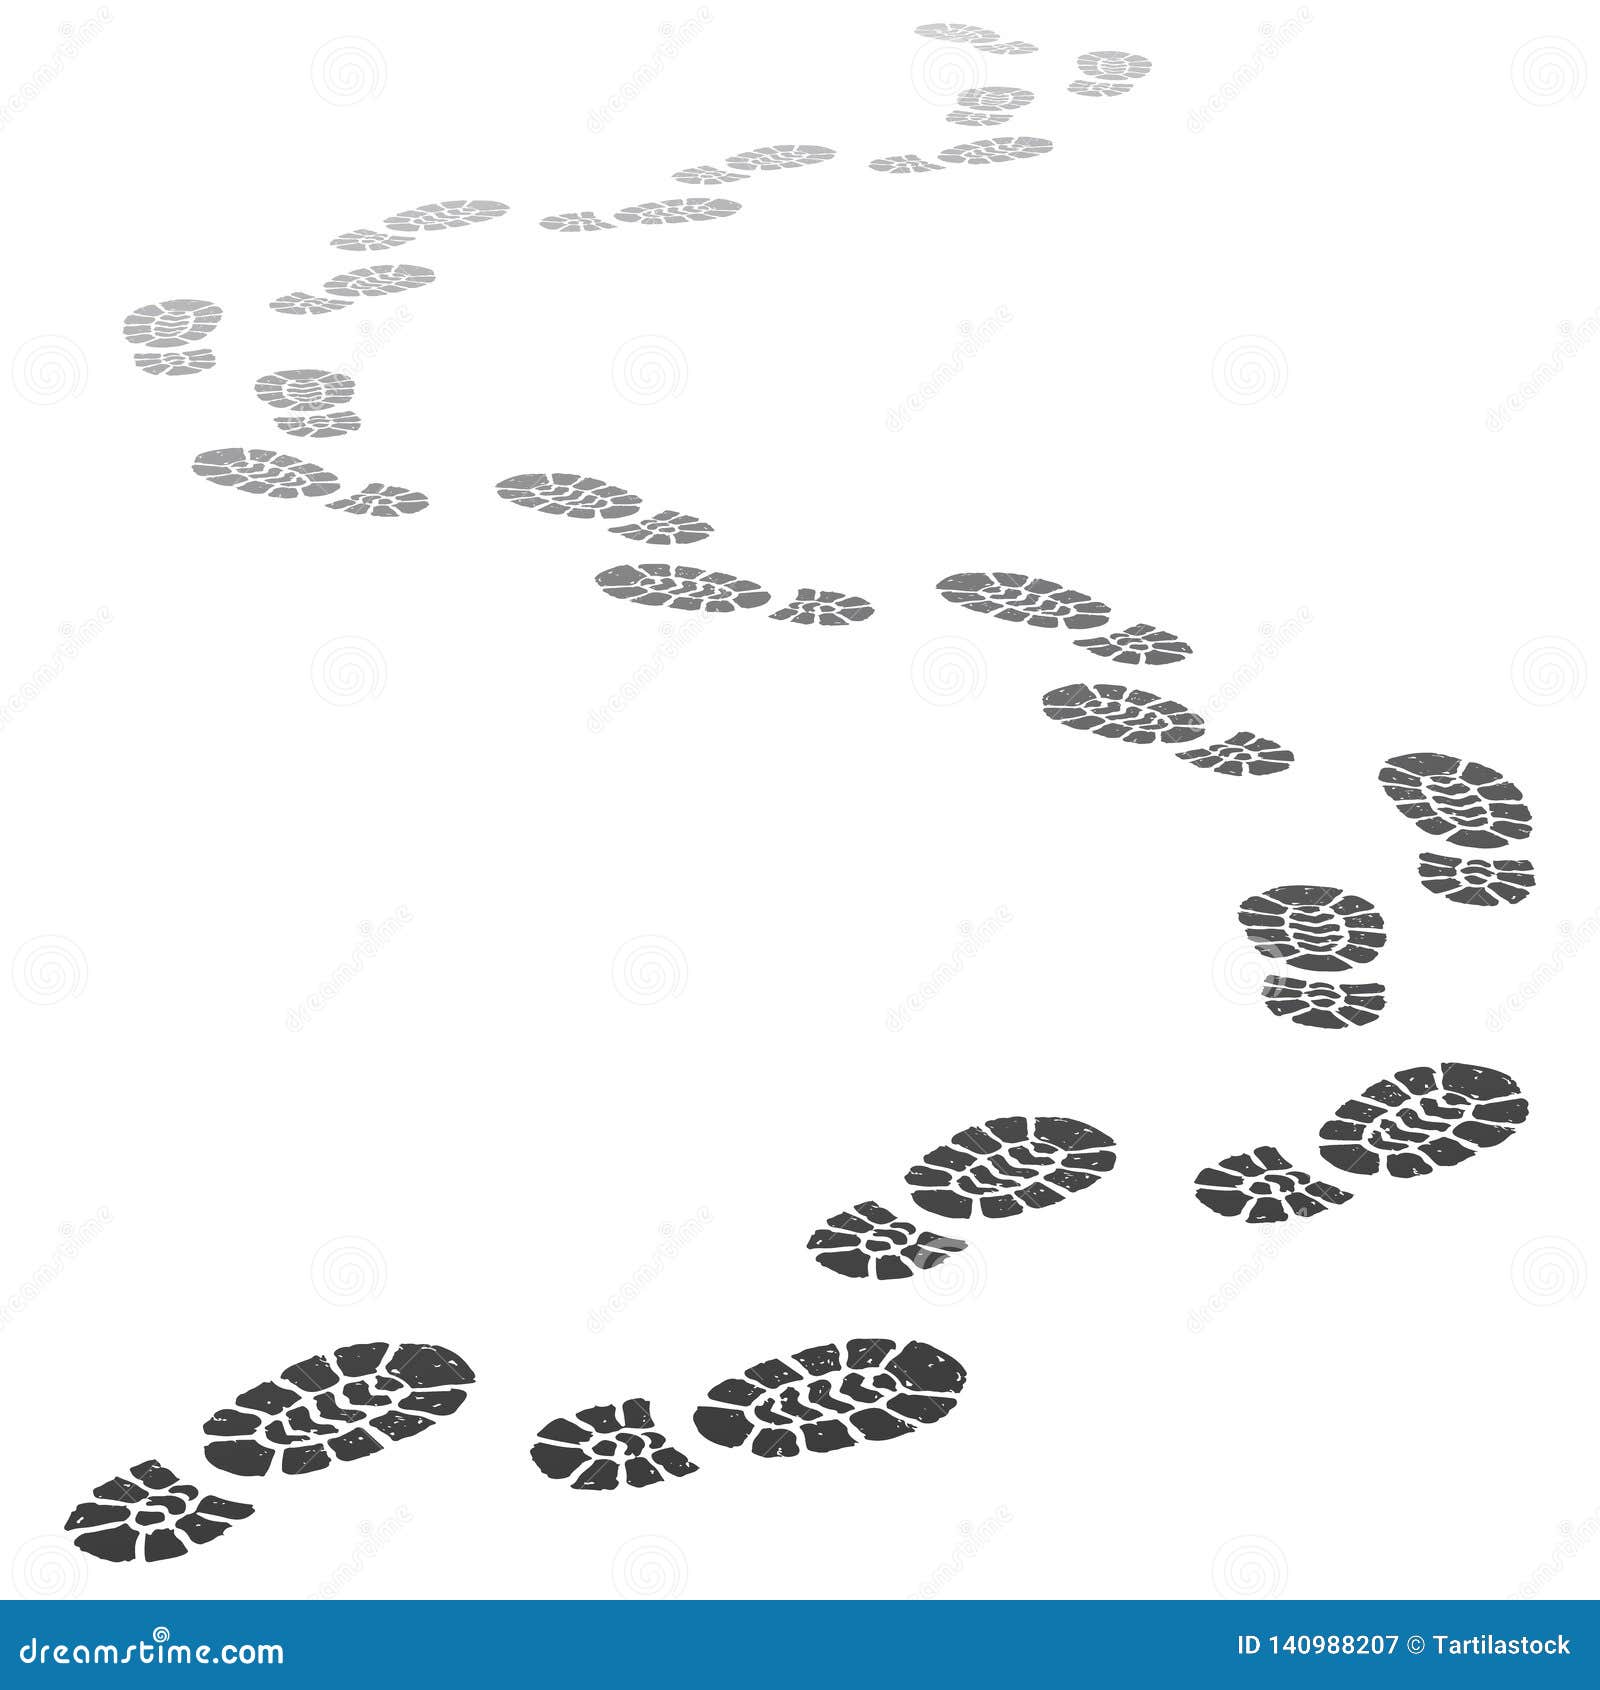 walking away footsteps. outgoing footprint silhouette, footstep prints and shoe steps going in perspective 